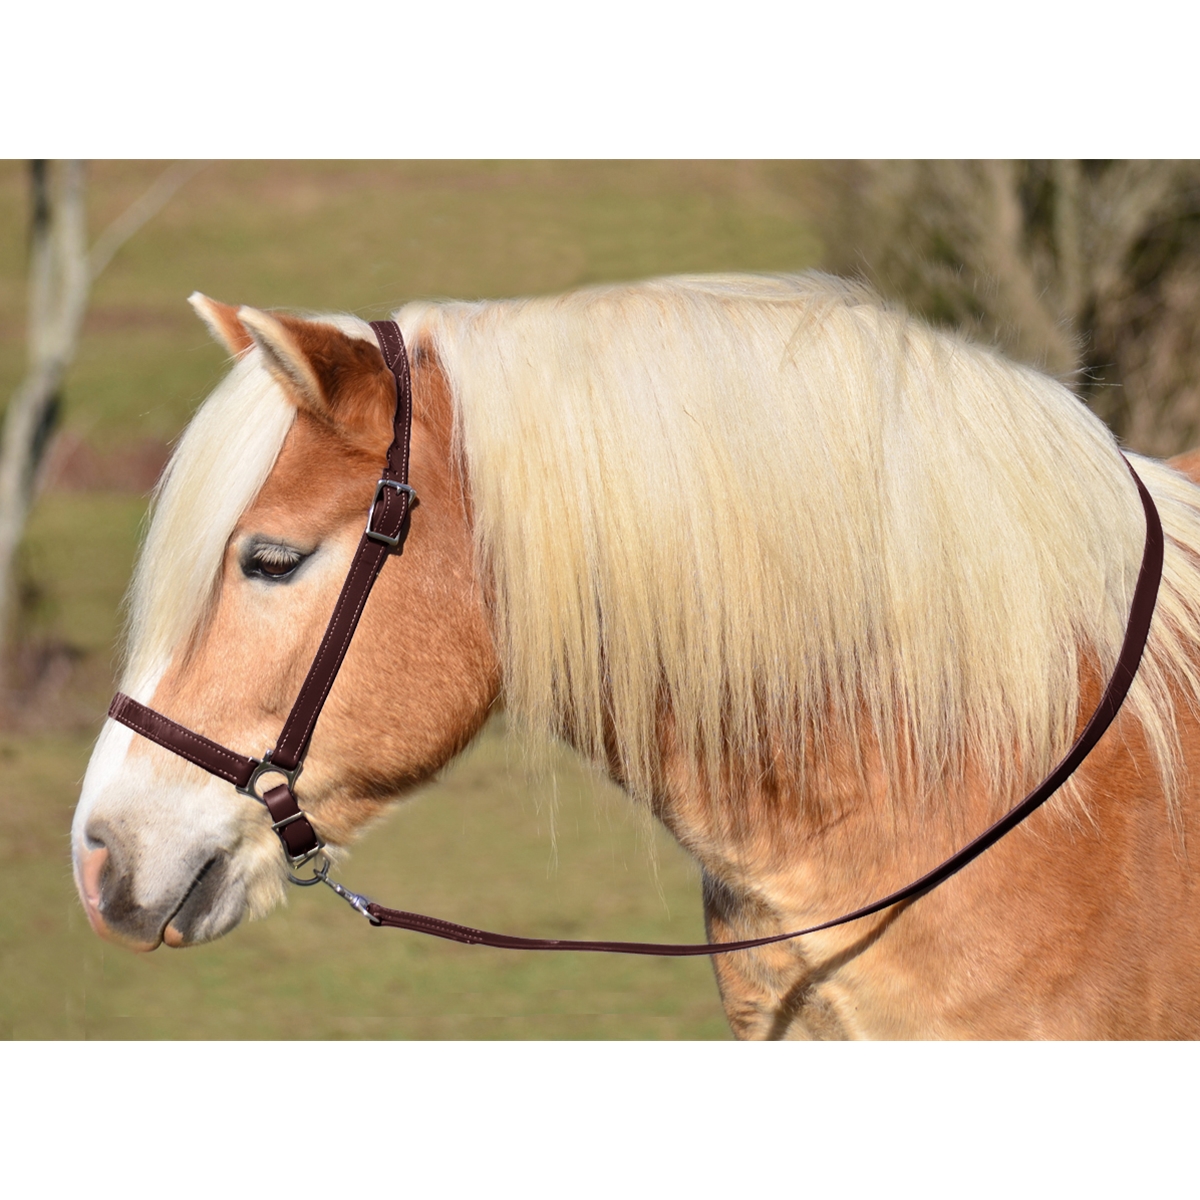 horse stores online